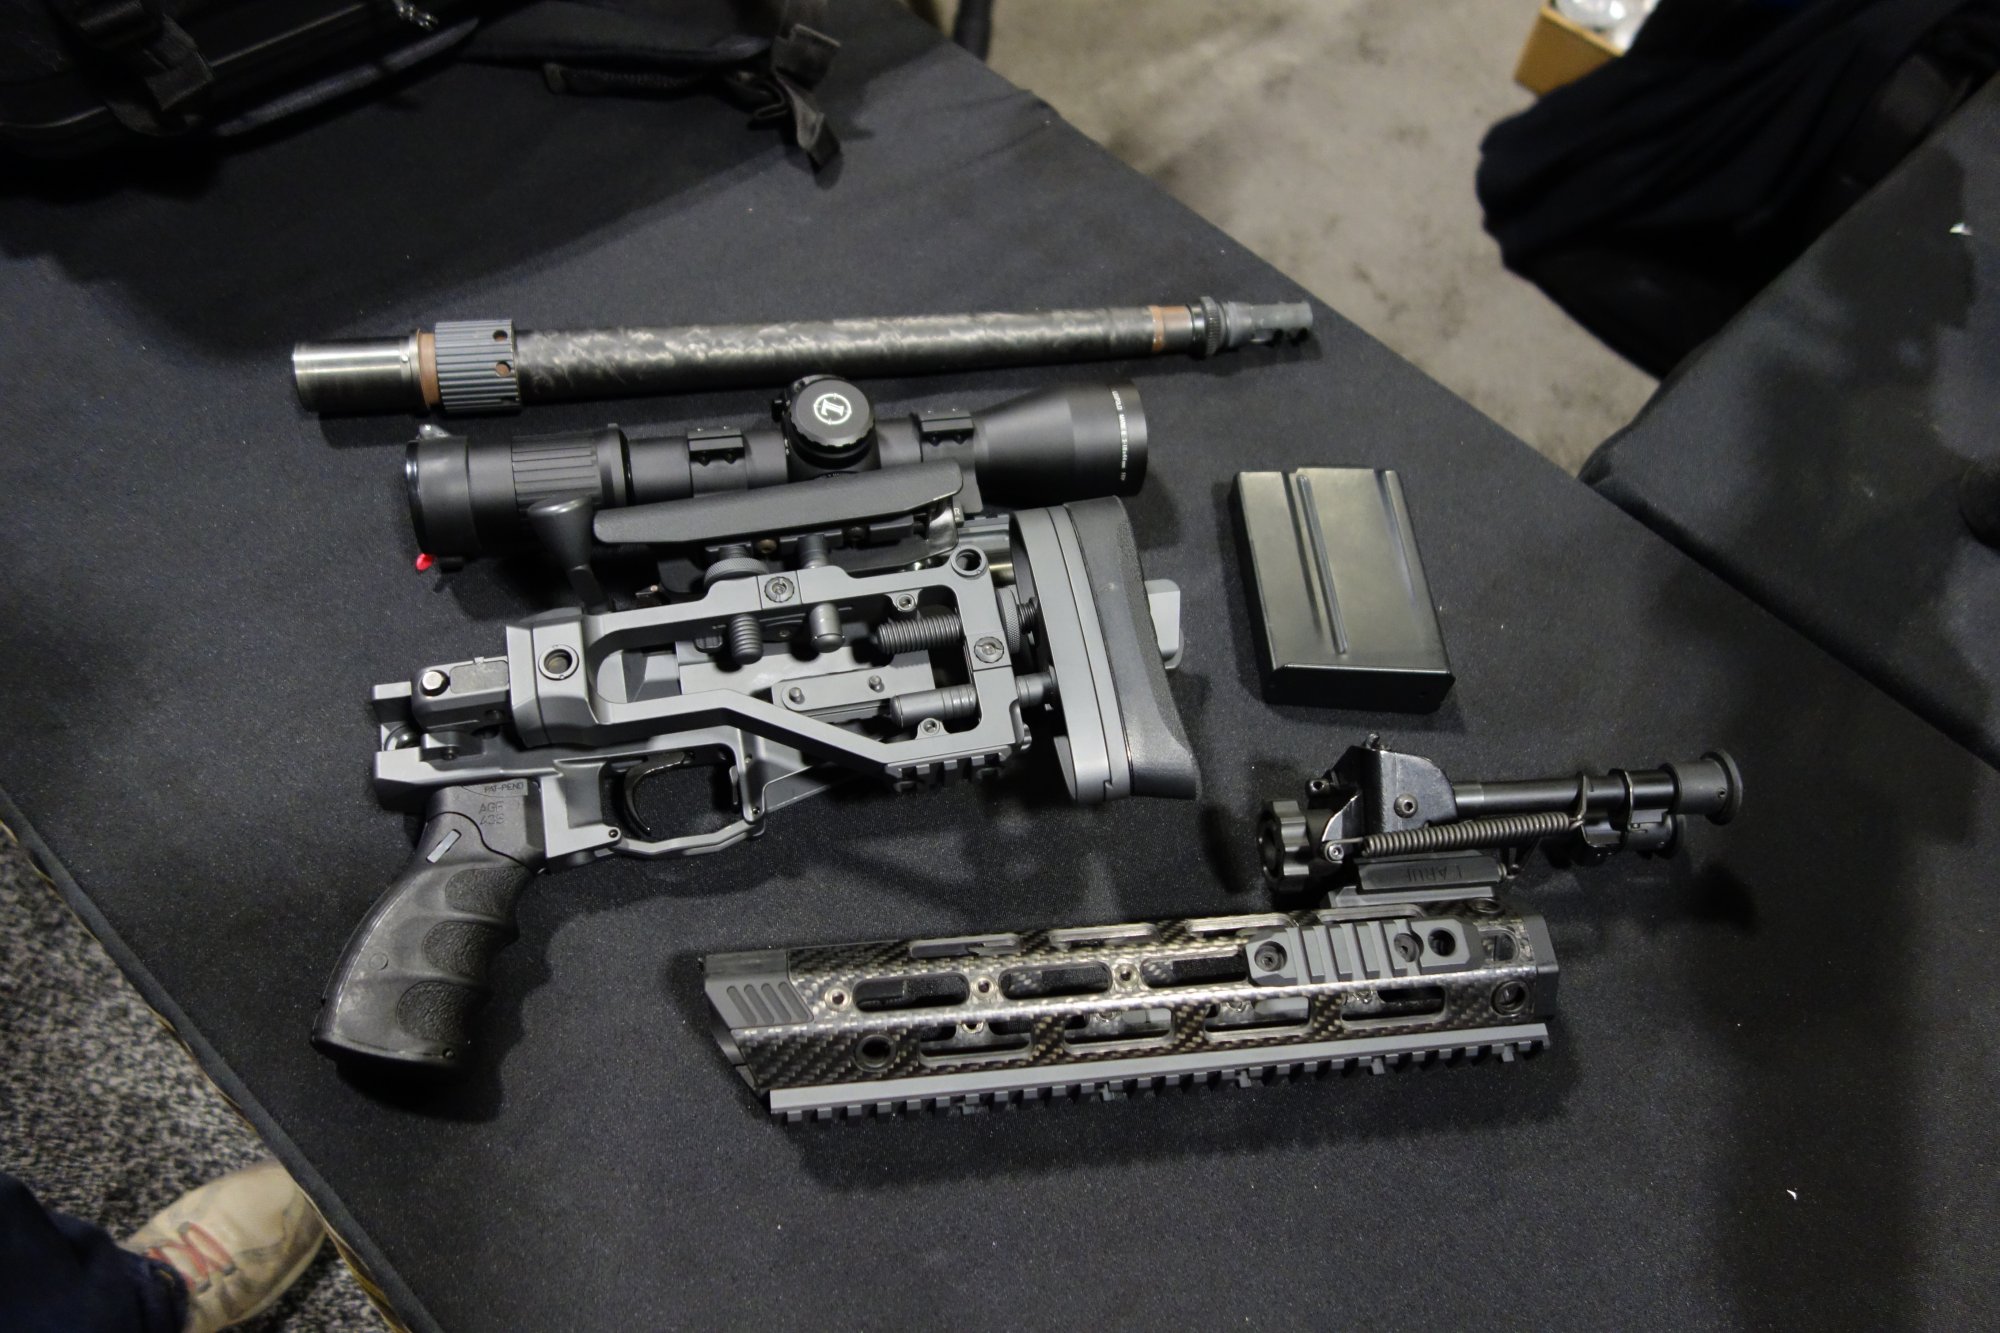 Remington_Defense_CSR_Concealable_Sniper_Rifle_Rucksack_Rifle_Breakdown_Takedown_Suppressed_Sniper_Carbine_with_Proof_Research_16-inch_Carbone_Fiber-Wrapped_Barrel_NDIA_SOFIC_2014_David_Crane_DefenseReview.com_DR_14.jpg